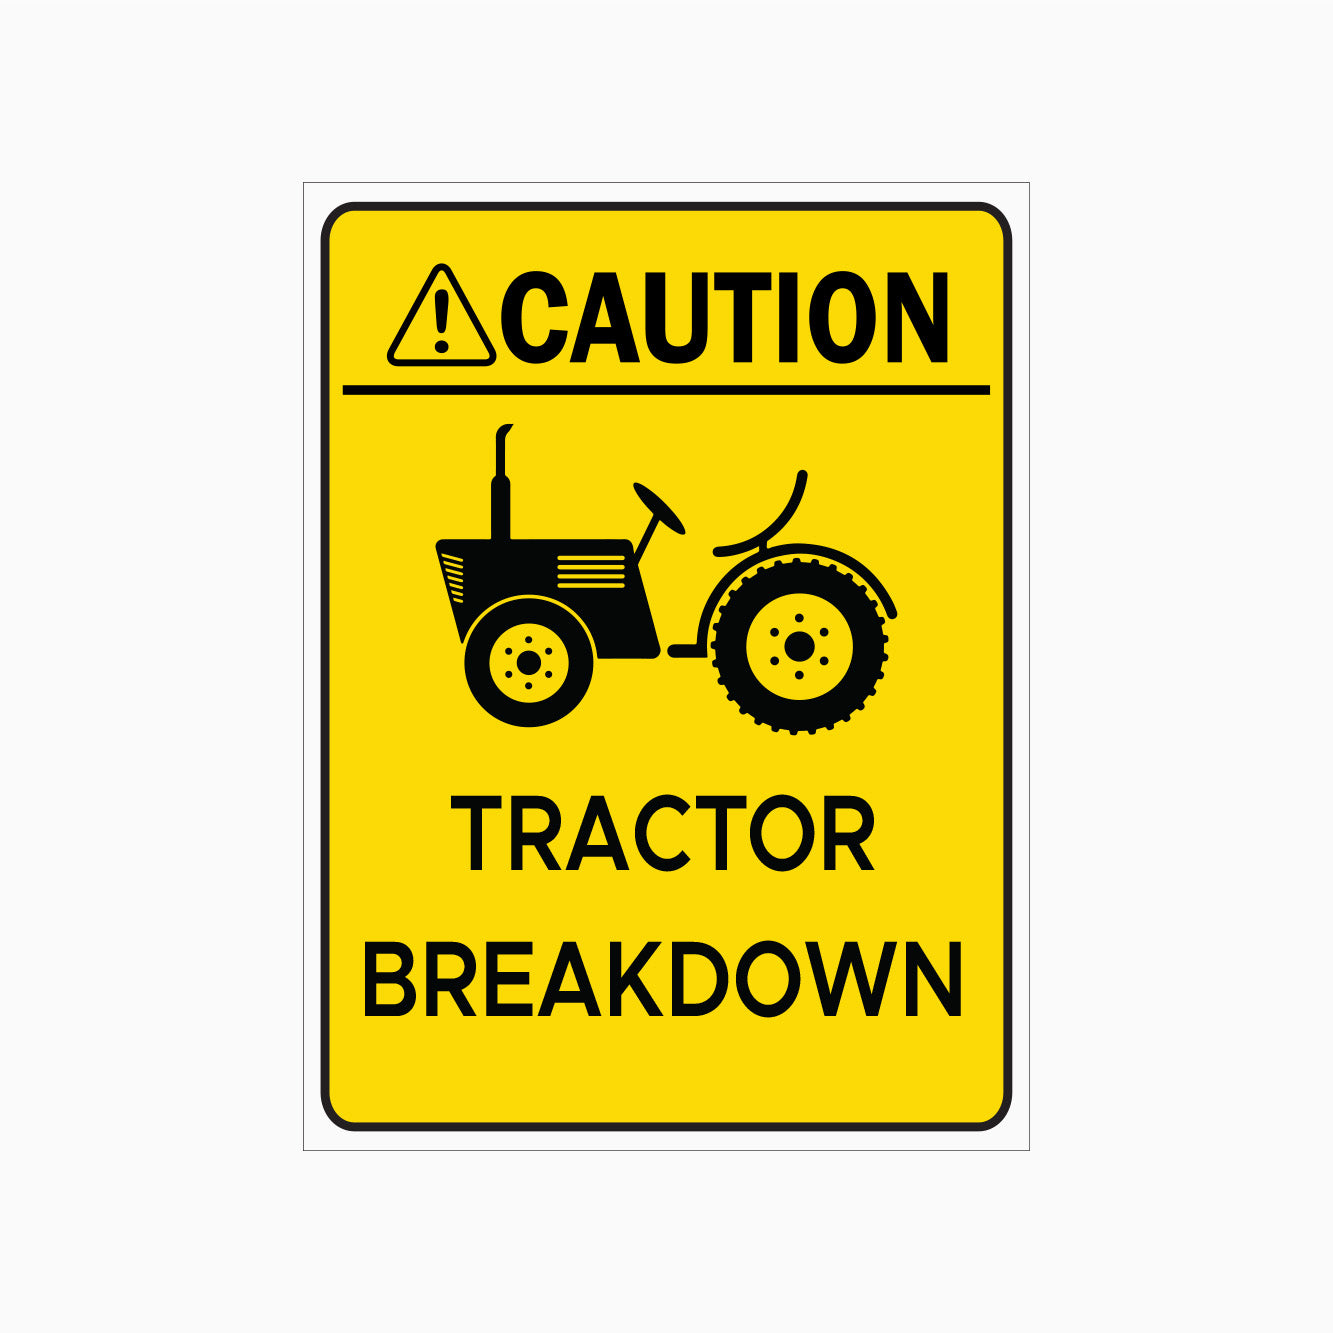 TRACTOR BREAKDOWN SIGN - CAUTION SIGN